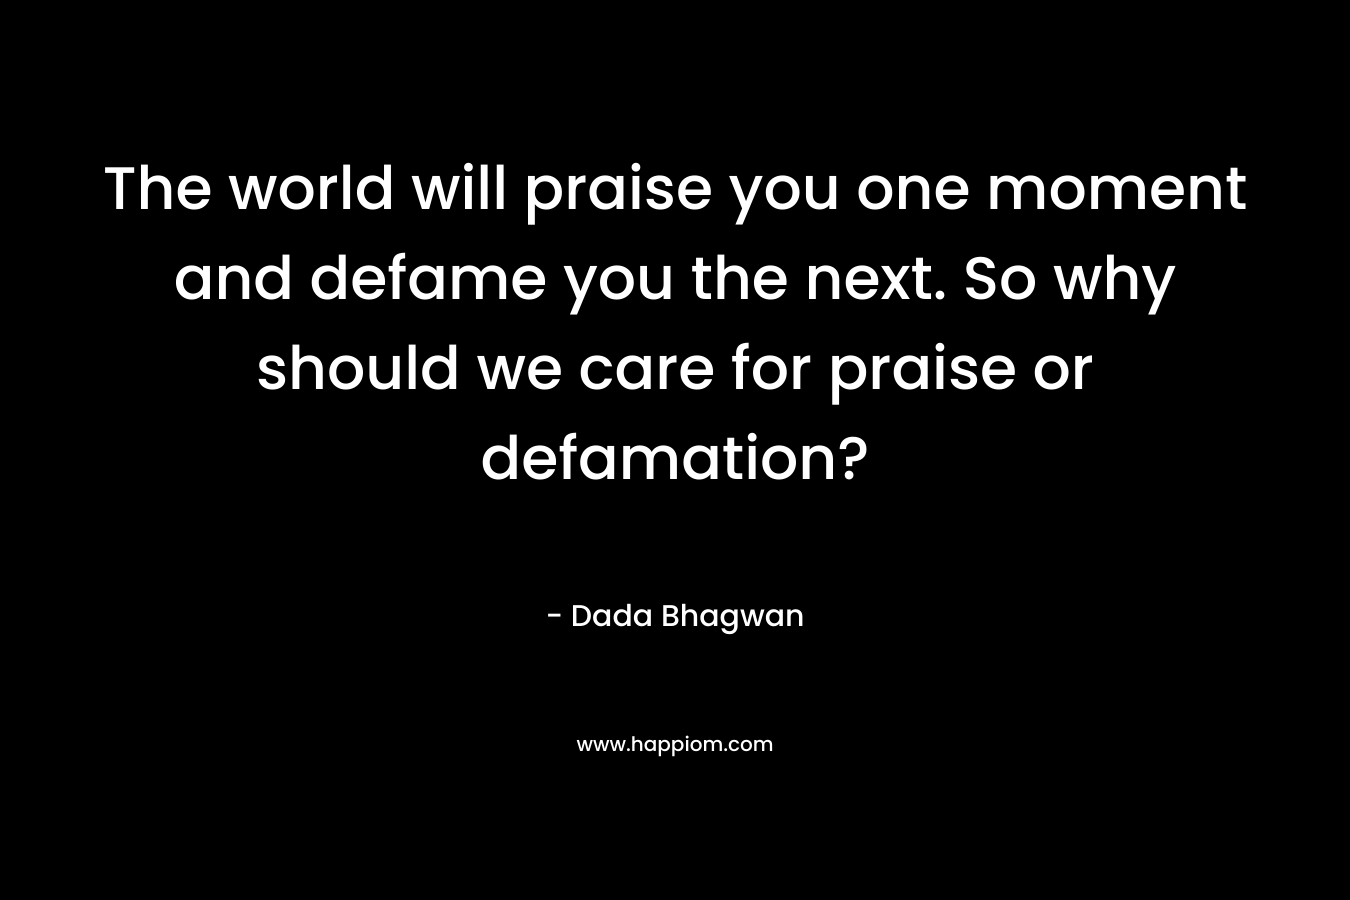 The world will praise you one moment and defame you the next. So why should we care for praise or defamation?